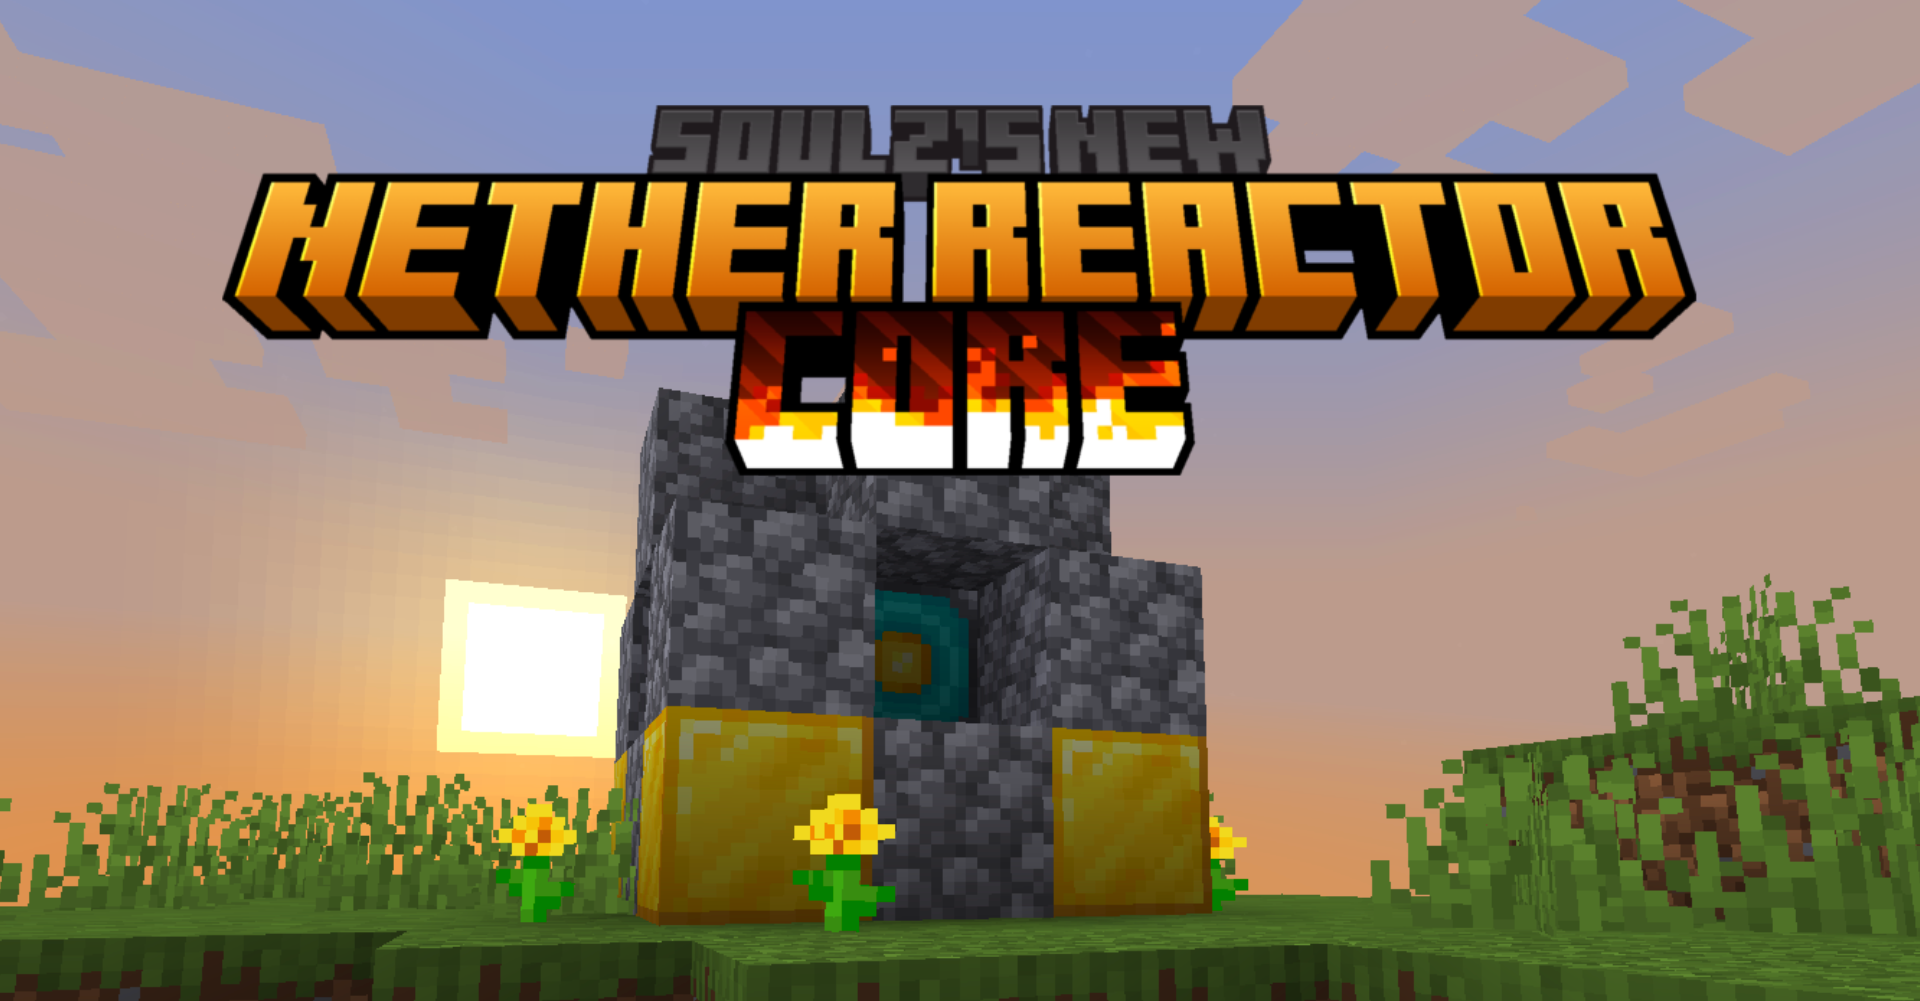 Title card for the with the Nether Reactor Core front and center